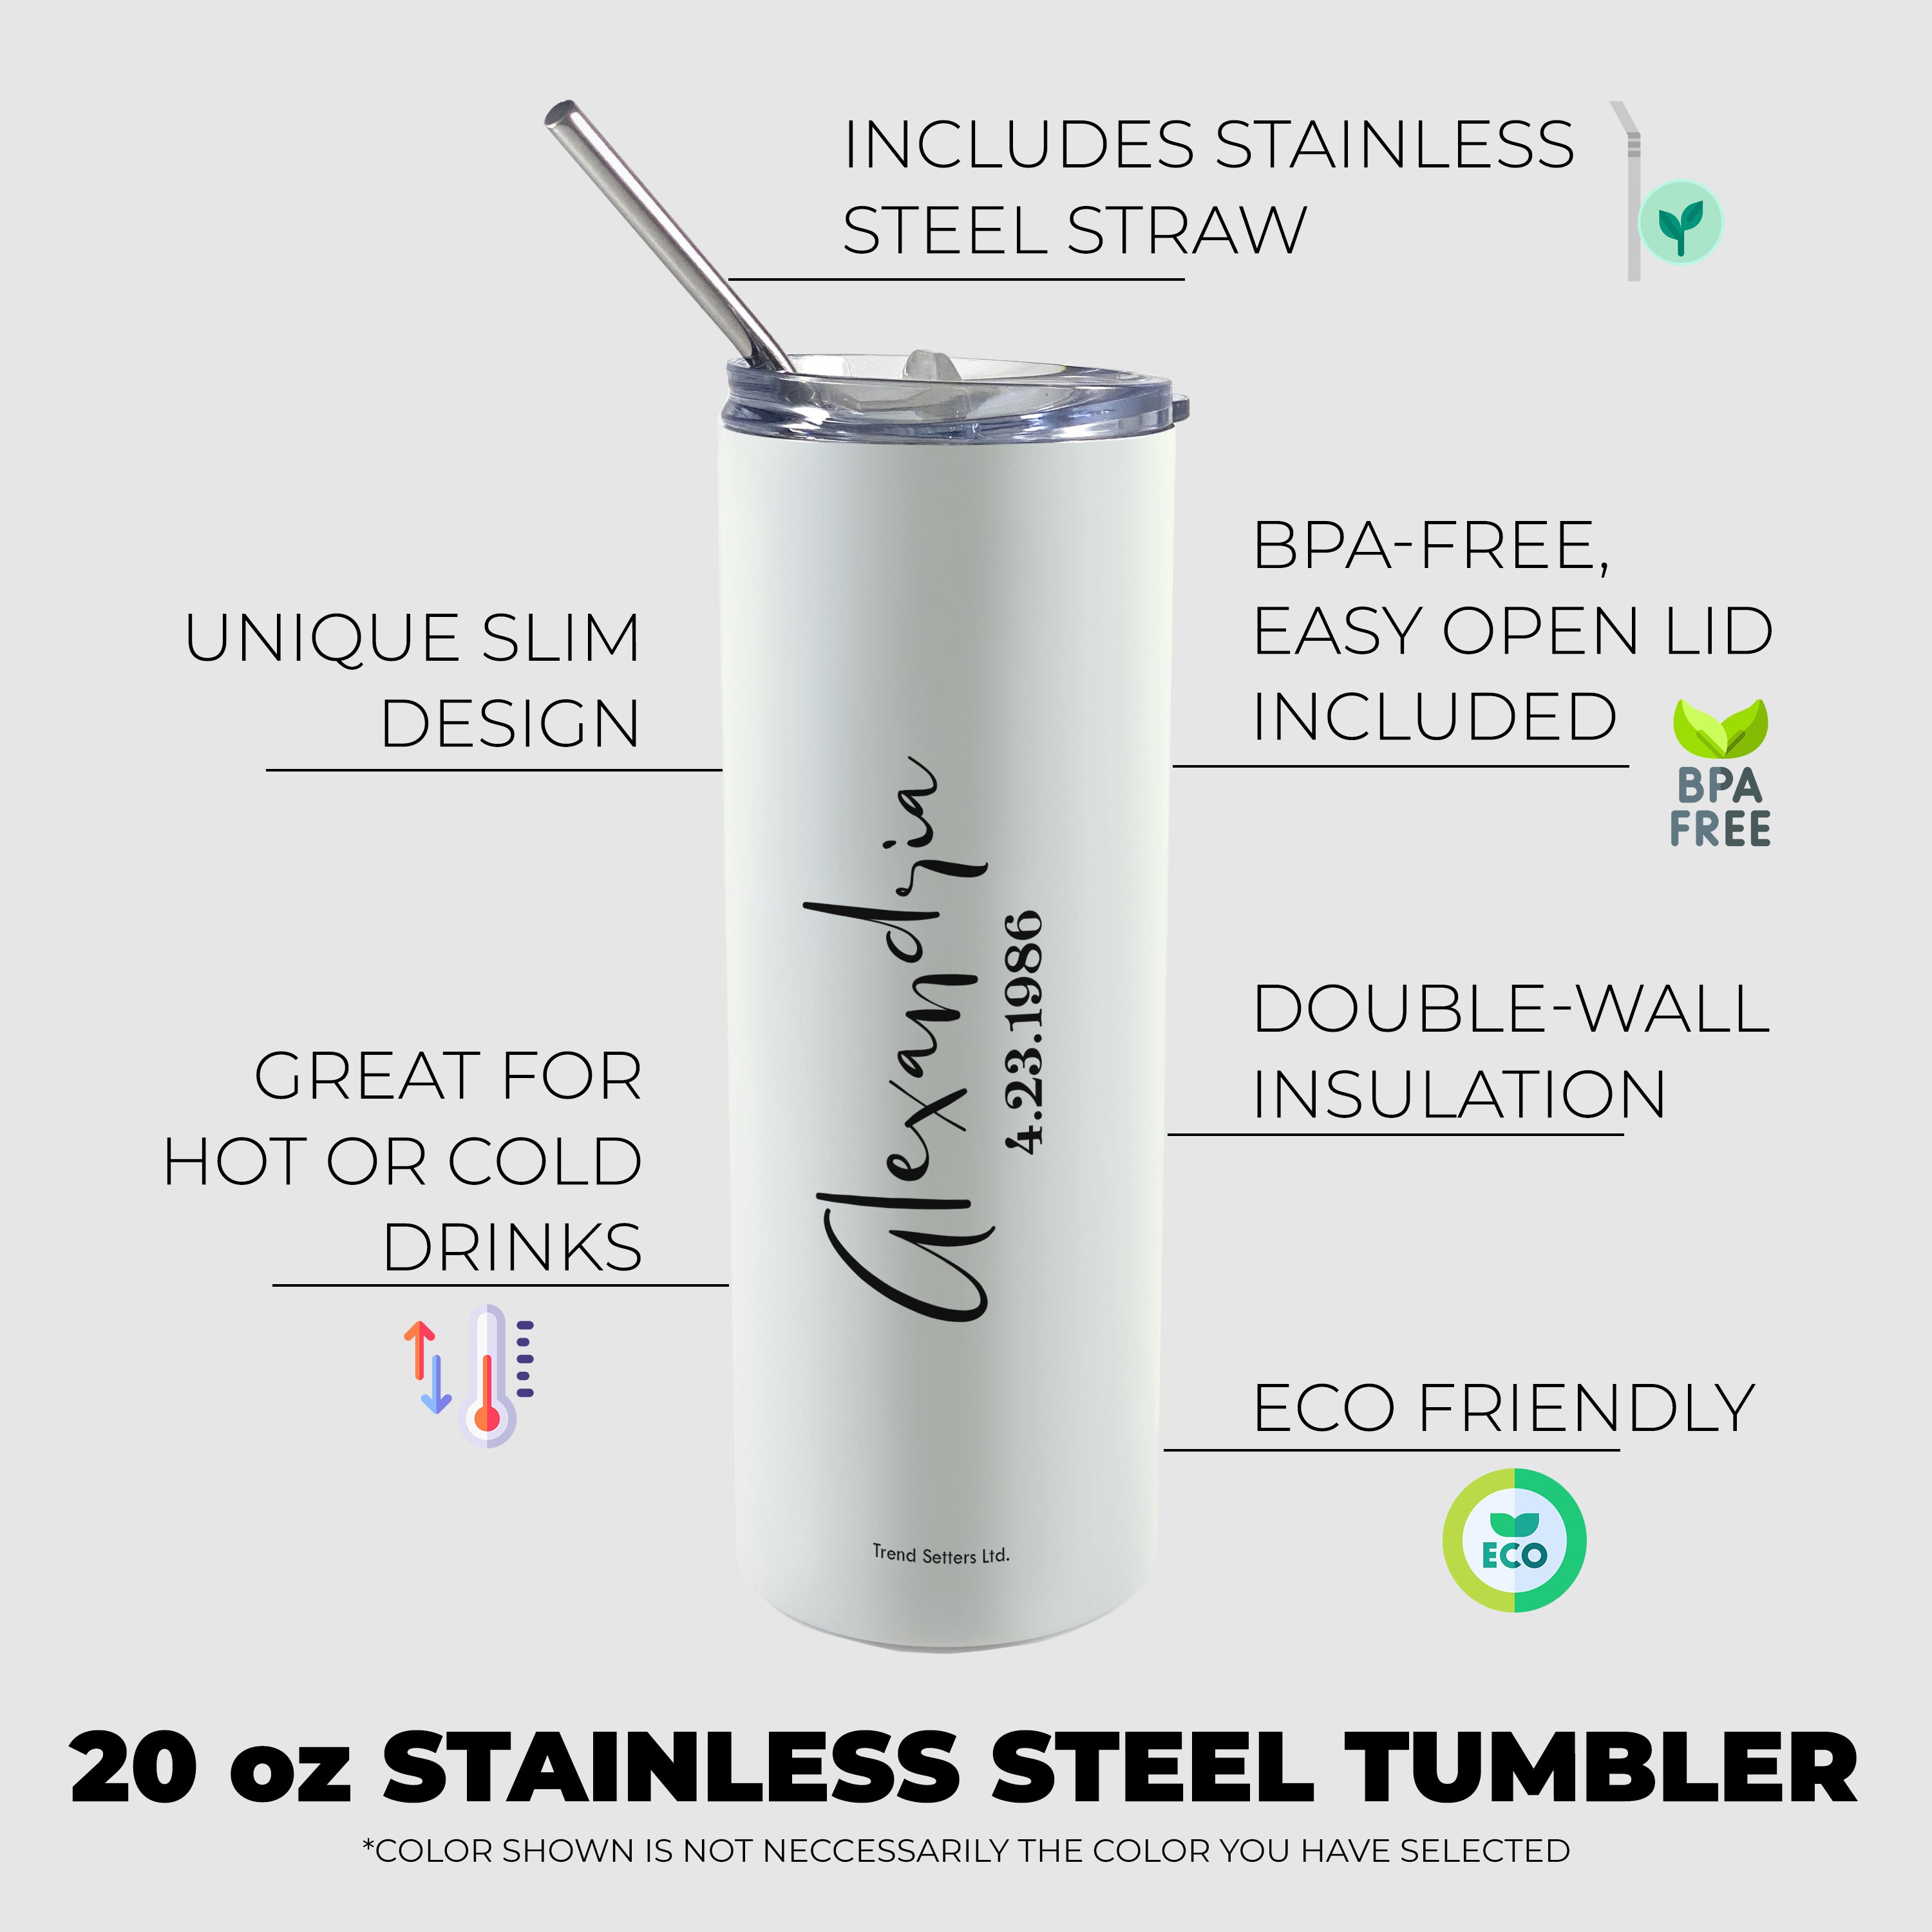 Birthday Collection (Birth Month Flower - Personalized) 20 oz Stainless Steel Travel White Tumbler with Straw